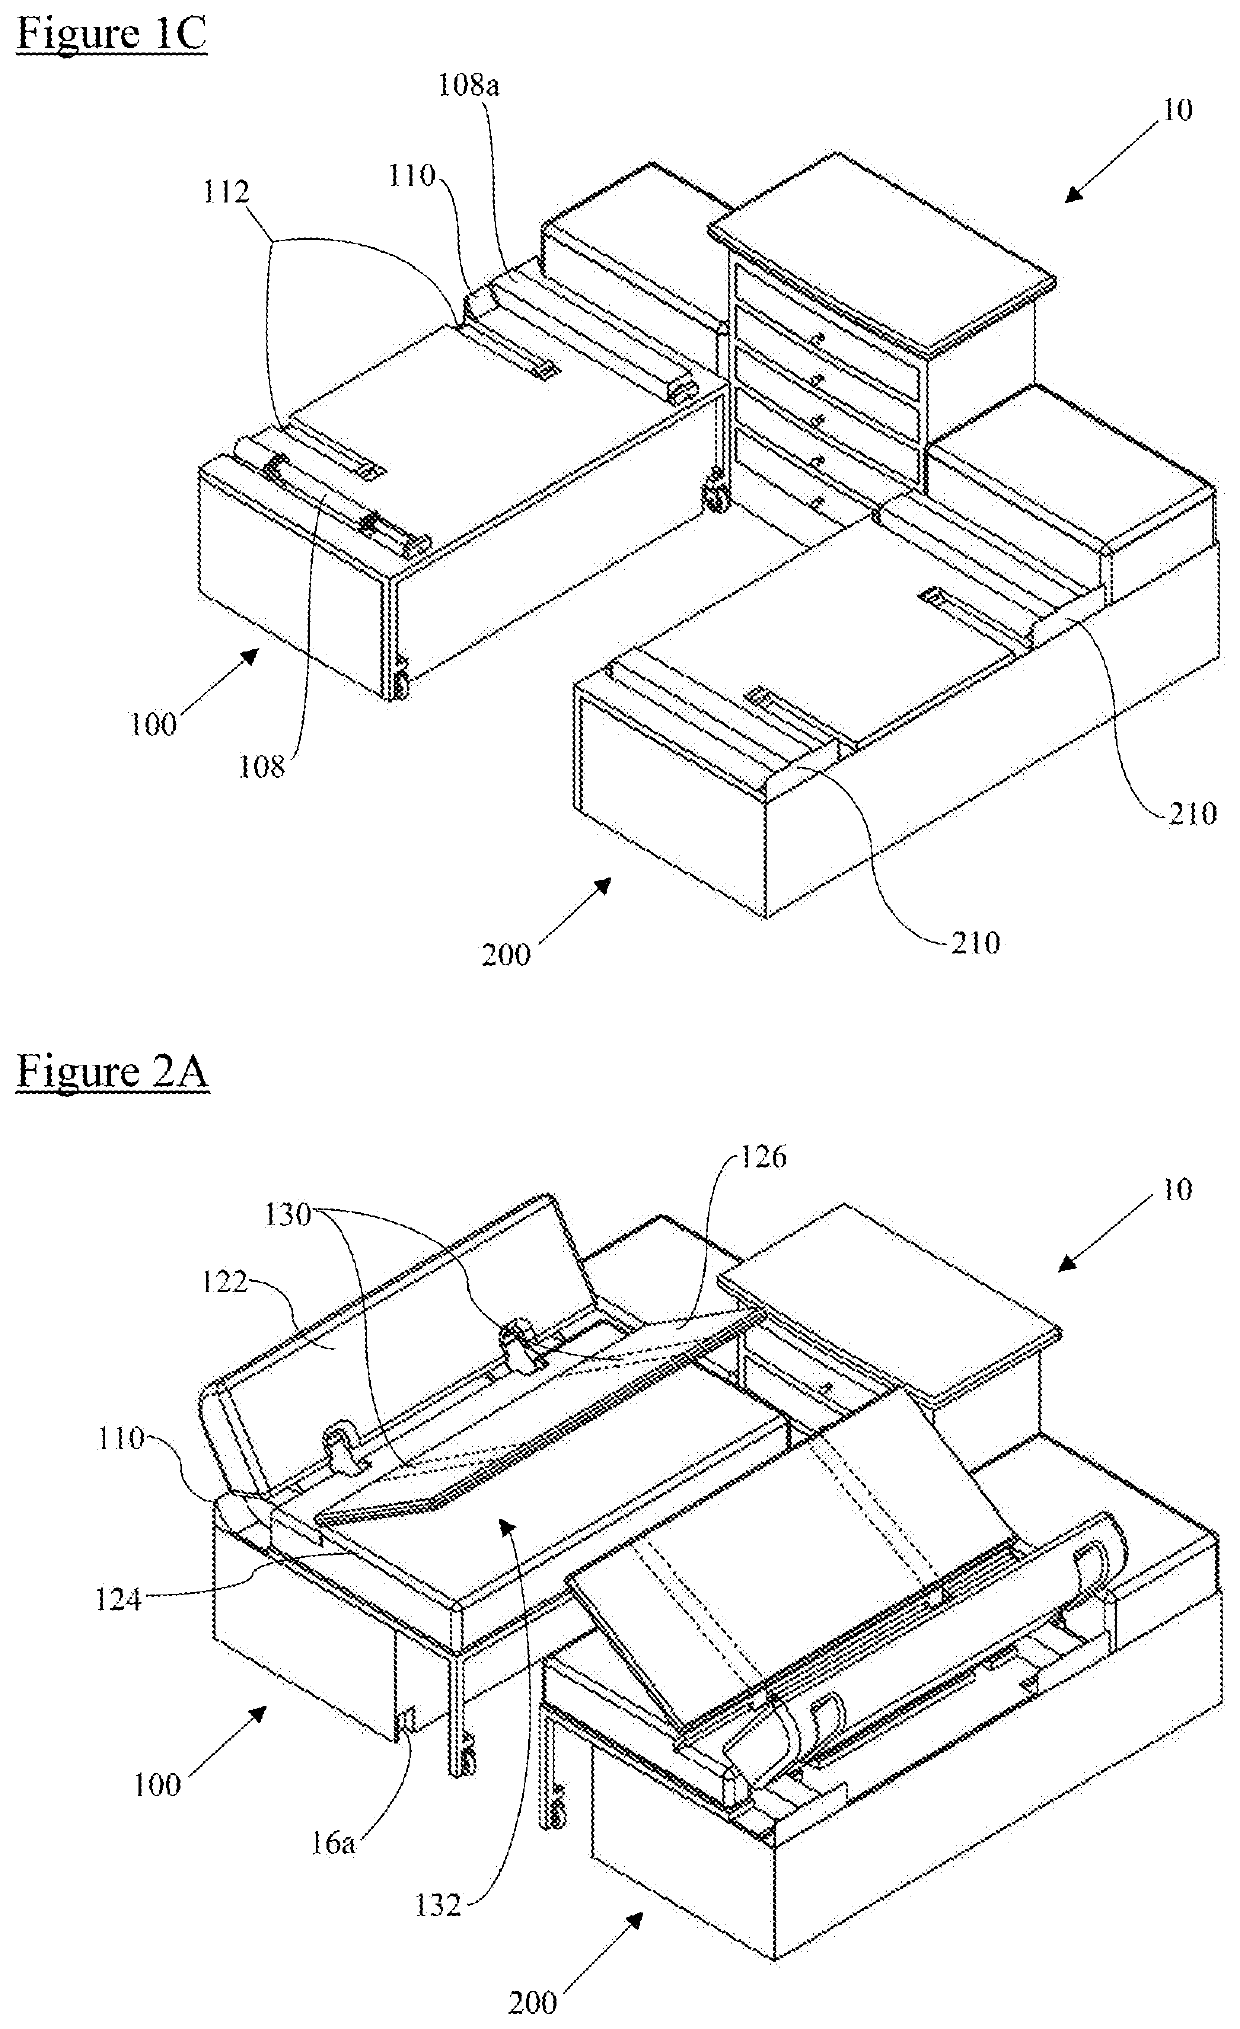 A seat moveable between a seat configuration and a bed configuration